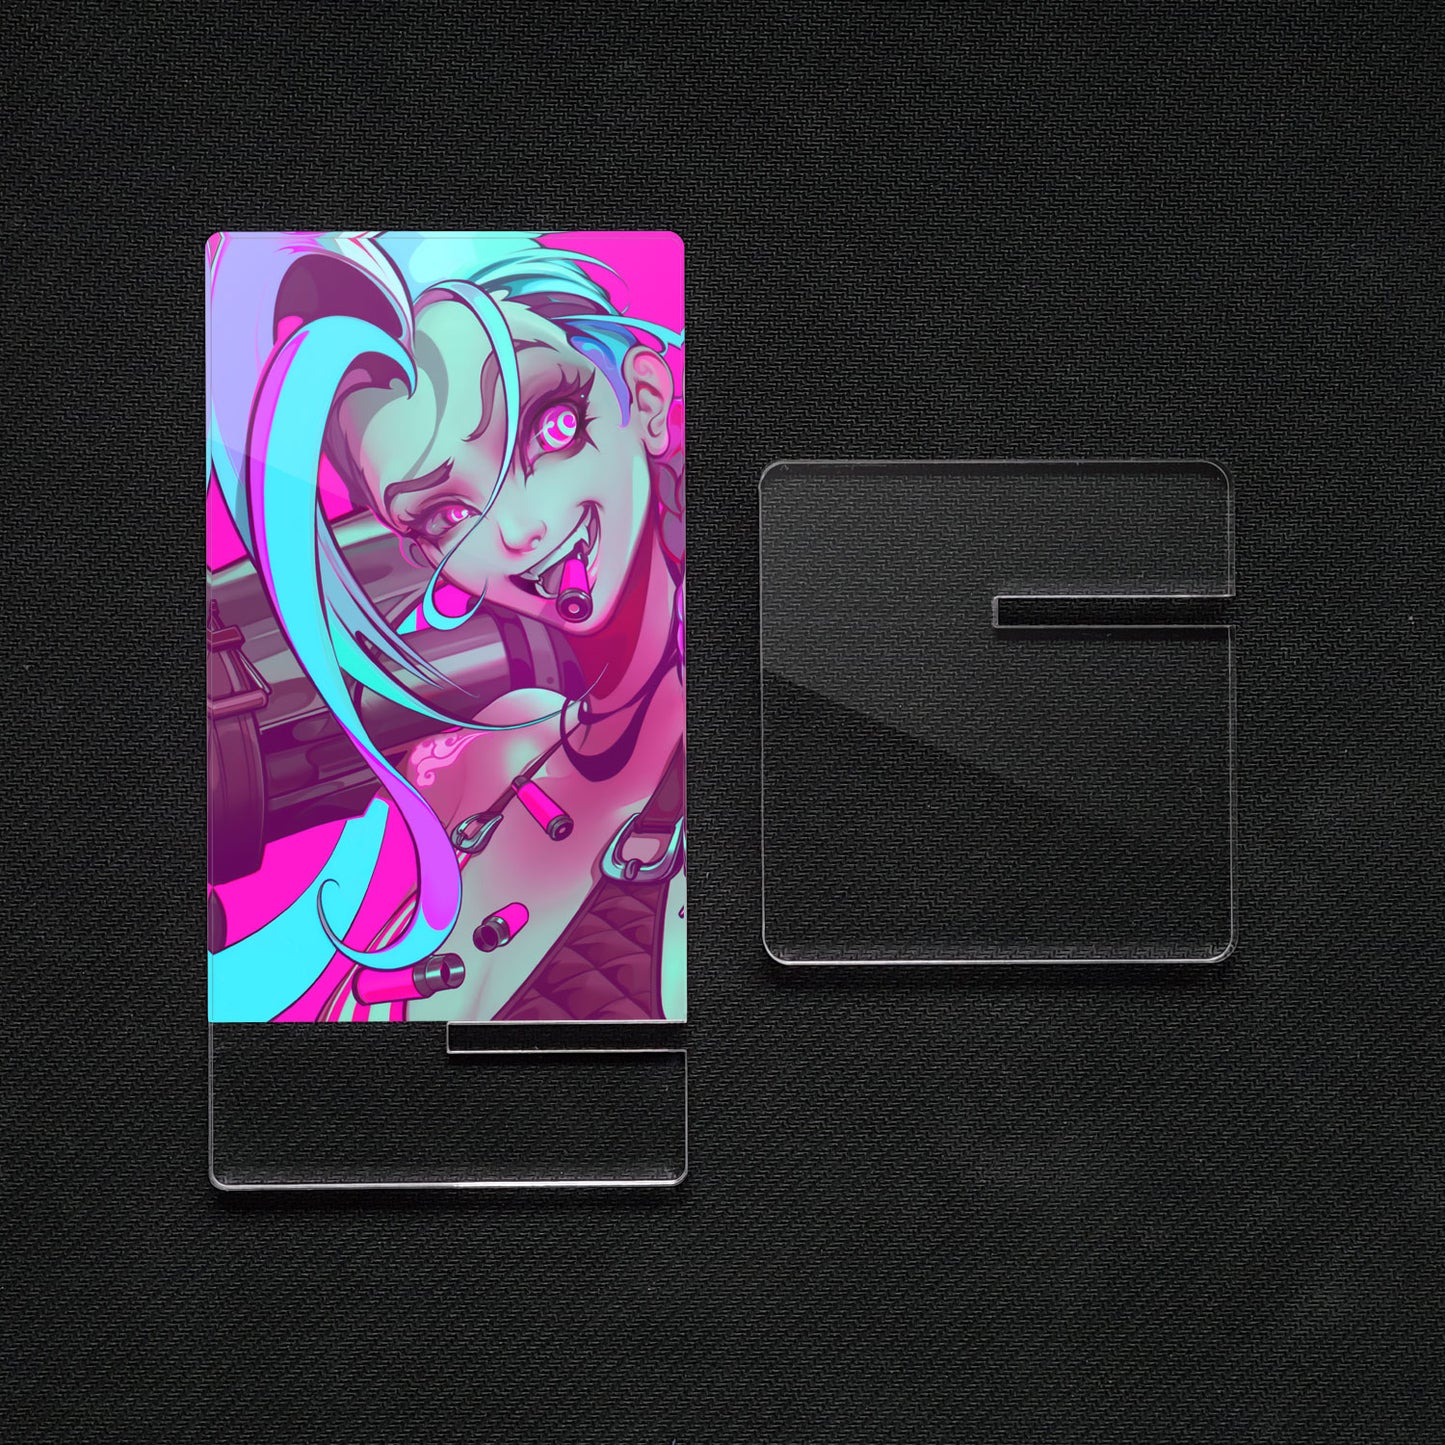 Support for Mobile Video Game League of Legends Jinx, methacrylate